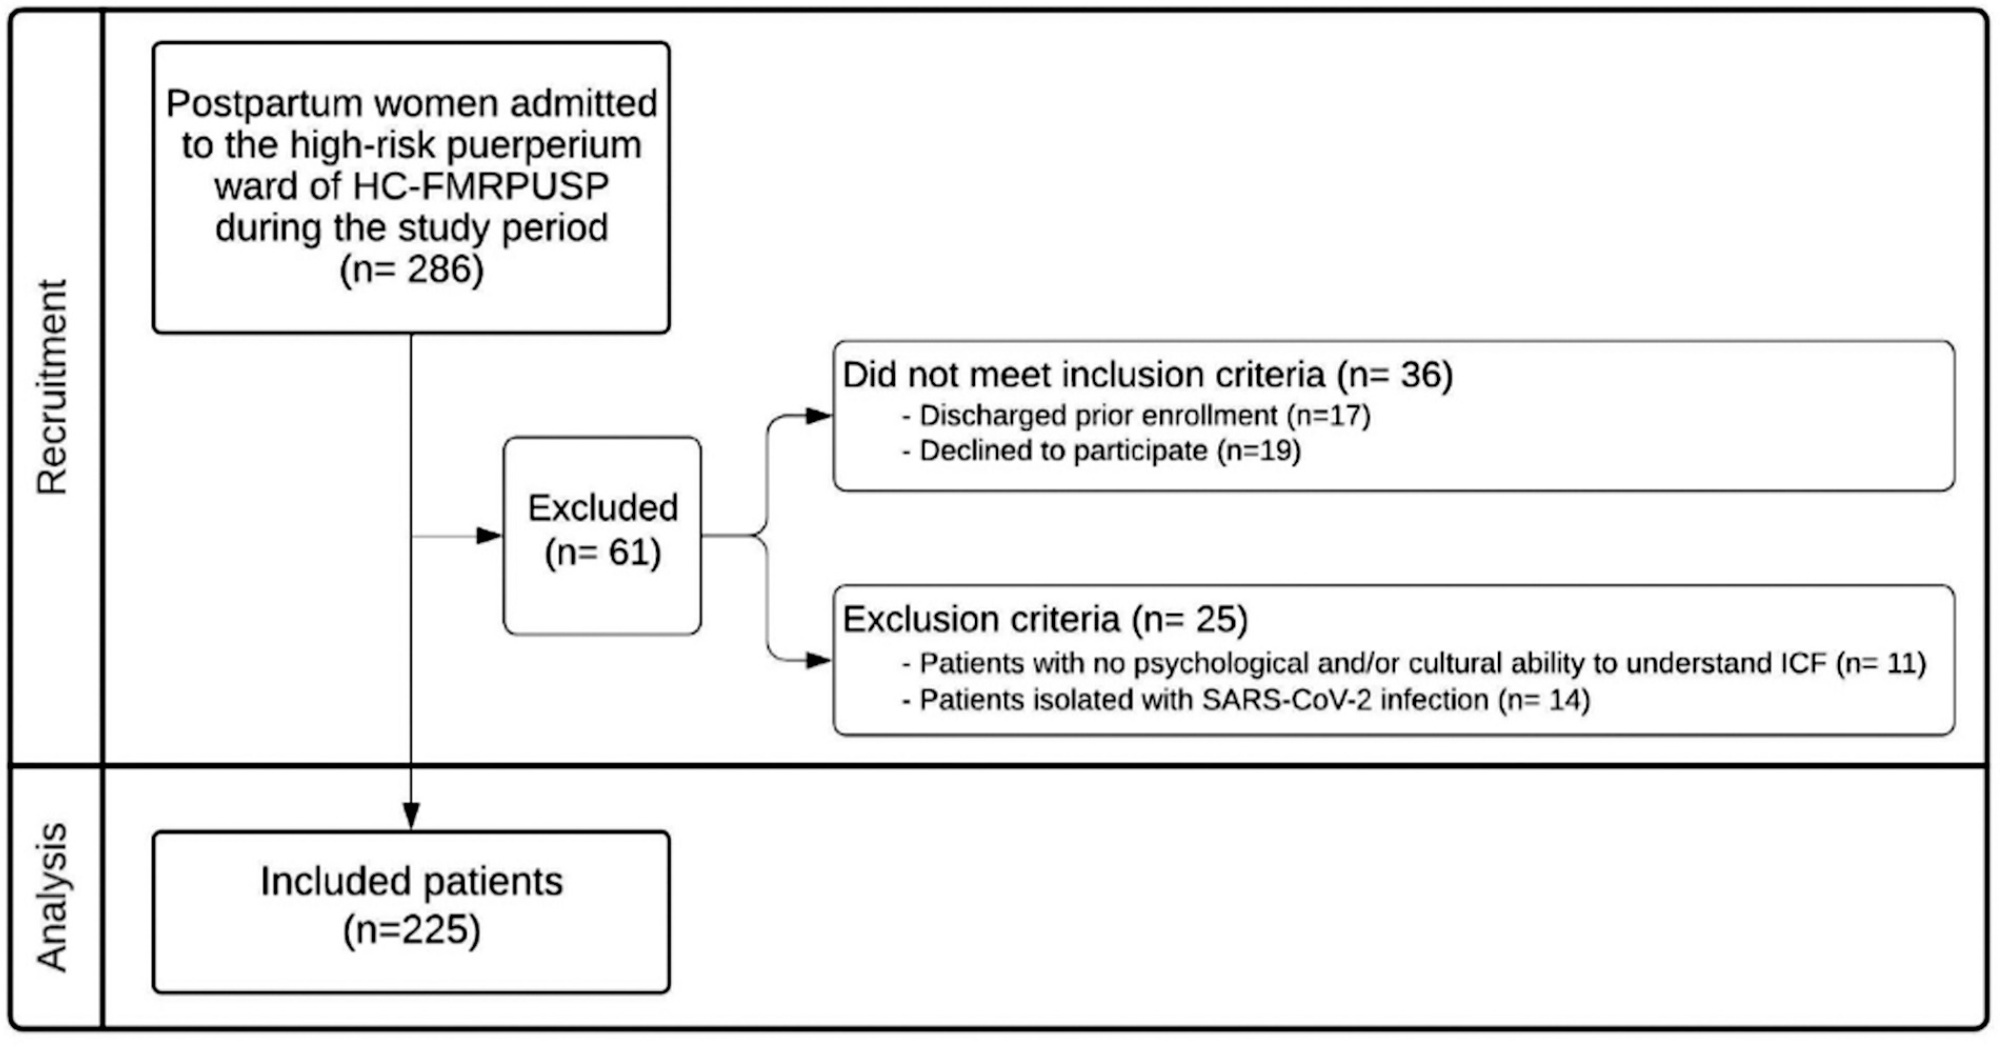 Seroprevalence of Toxoplasmosis in Puerperal Women Treated at a Tertiary Referral Hospital